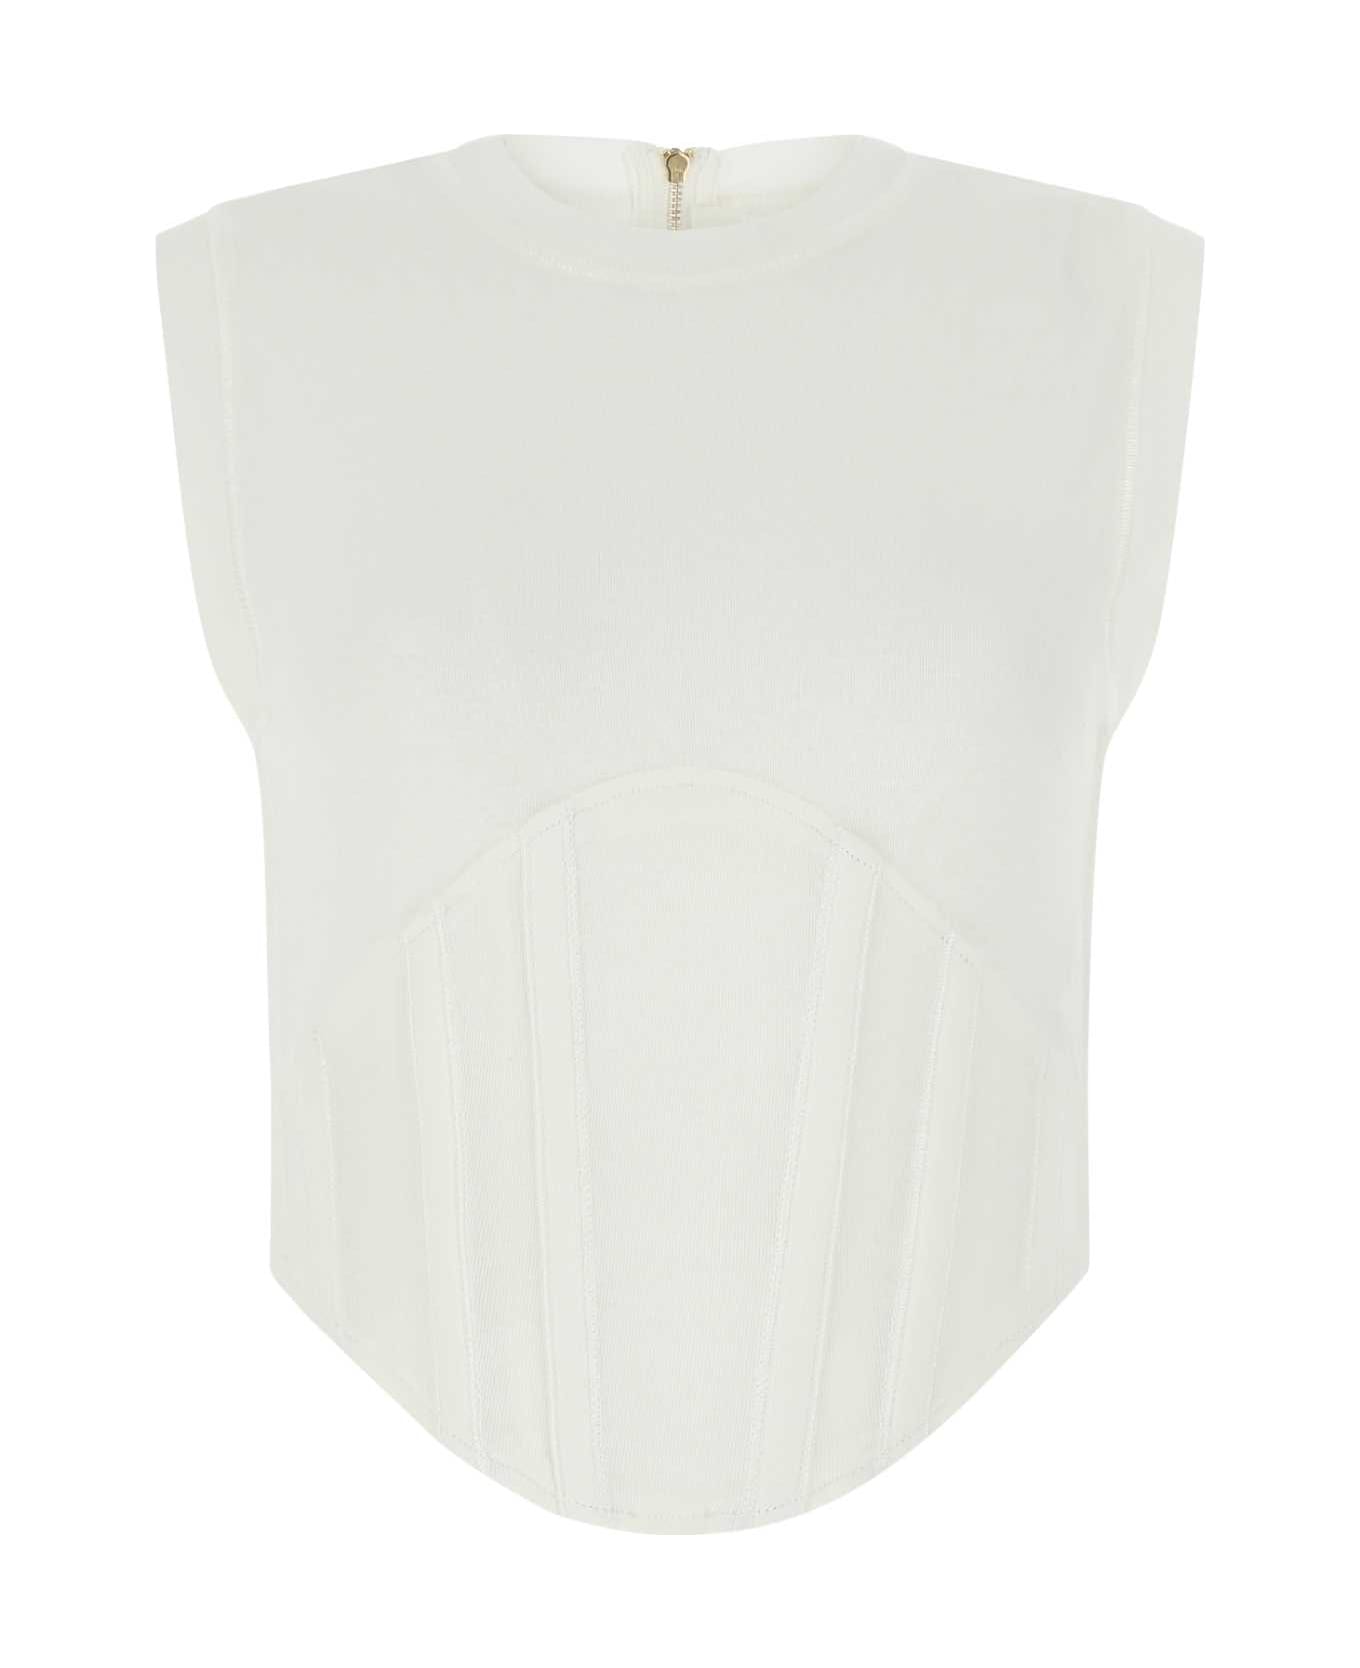 Dion Lee White Cotton Top - IVORY